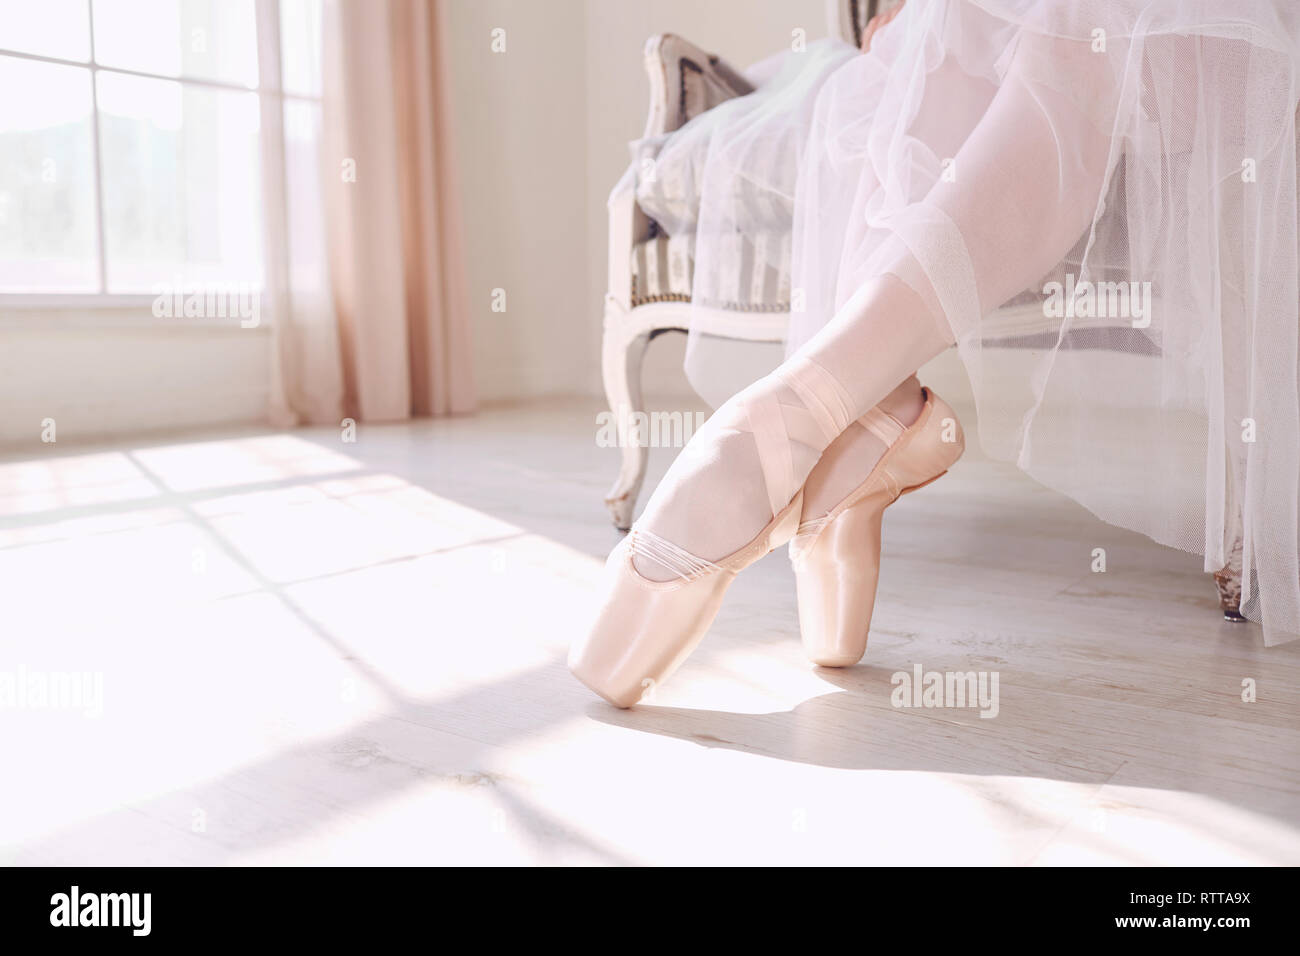 Pointe shoes on the feet of a ballerina. Stock Photo